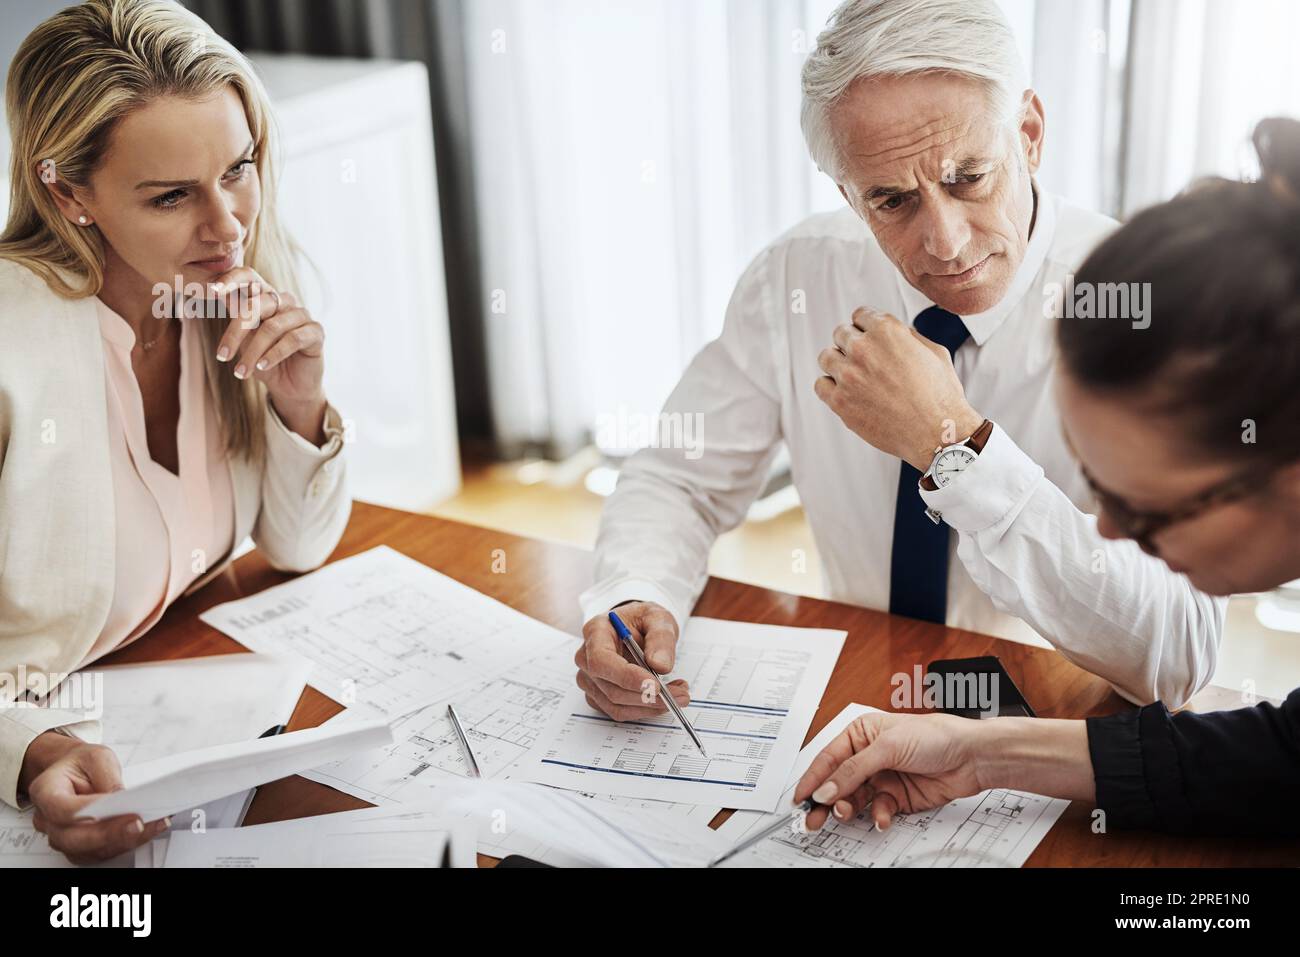 Everything seems to be going accordingly. a group of architects working together on blueprints of a house around a table inside of a building. Stock Photo